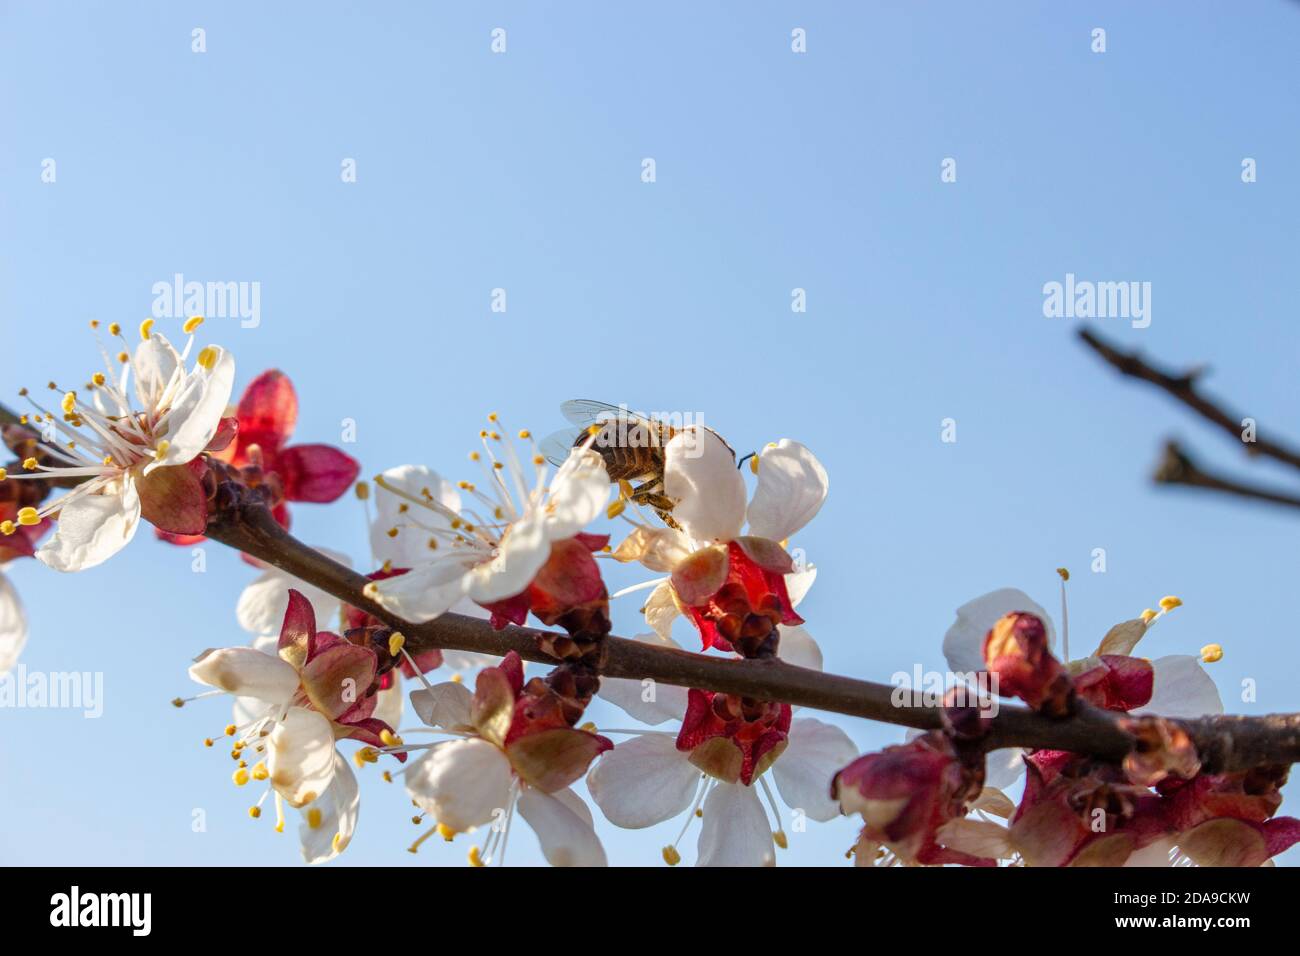 The bee collects honey on the fruit tree flowers, blue sky background in clear spring weather. Stock Photo